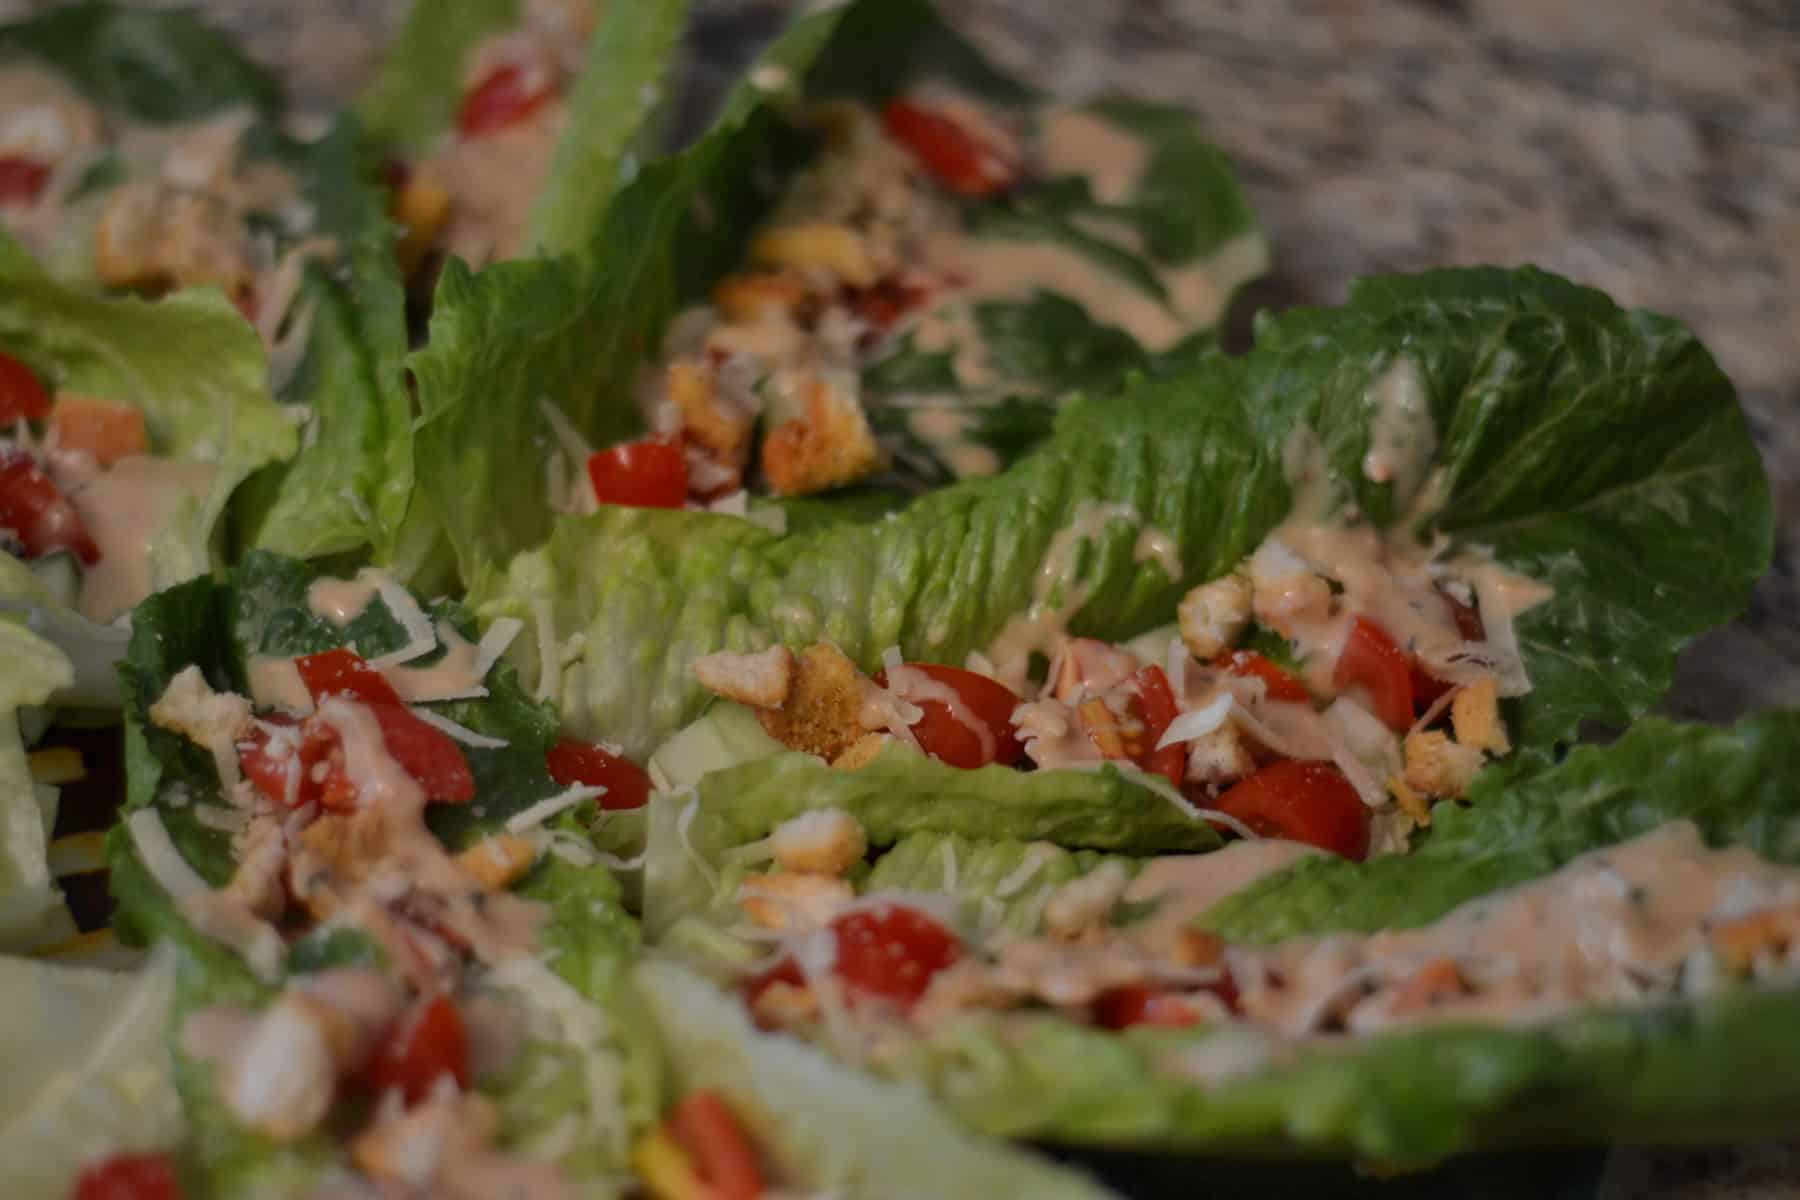 How to Cut Romaine Lettuce for Salad - Your Home, Made Healthy